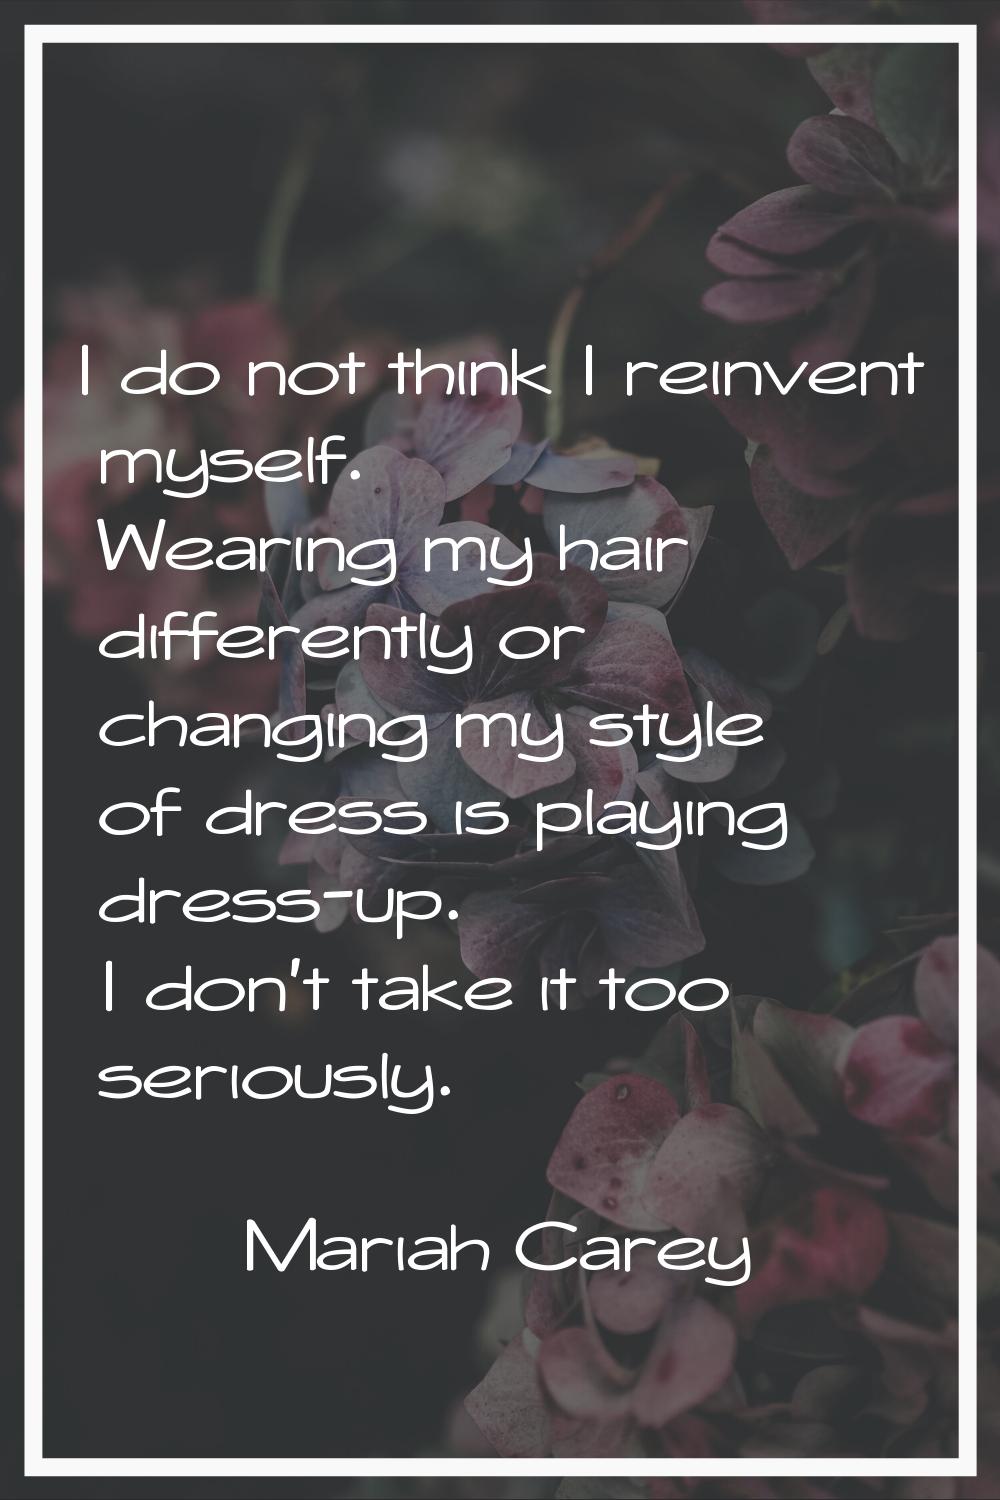 I do not think I reinvent myself. Wearing my hair differently or changing my style of dress is play